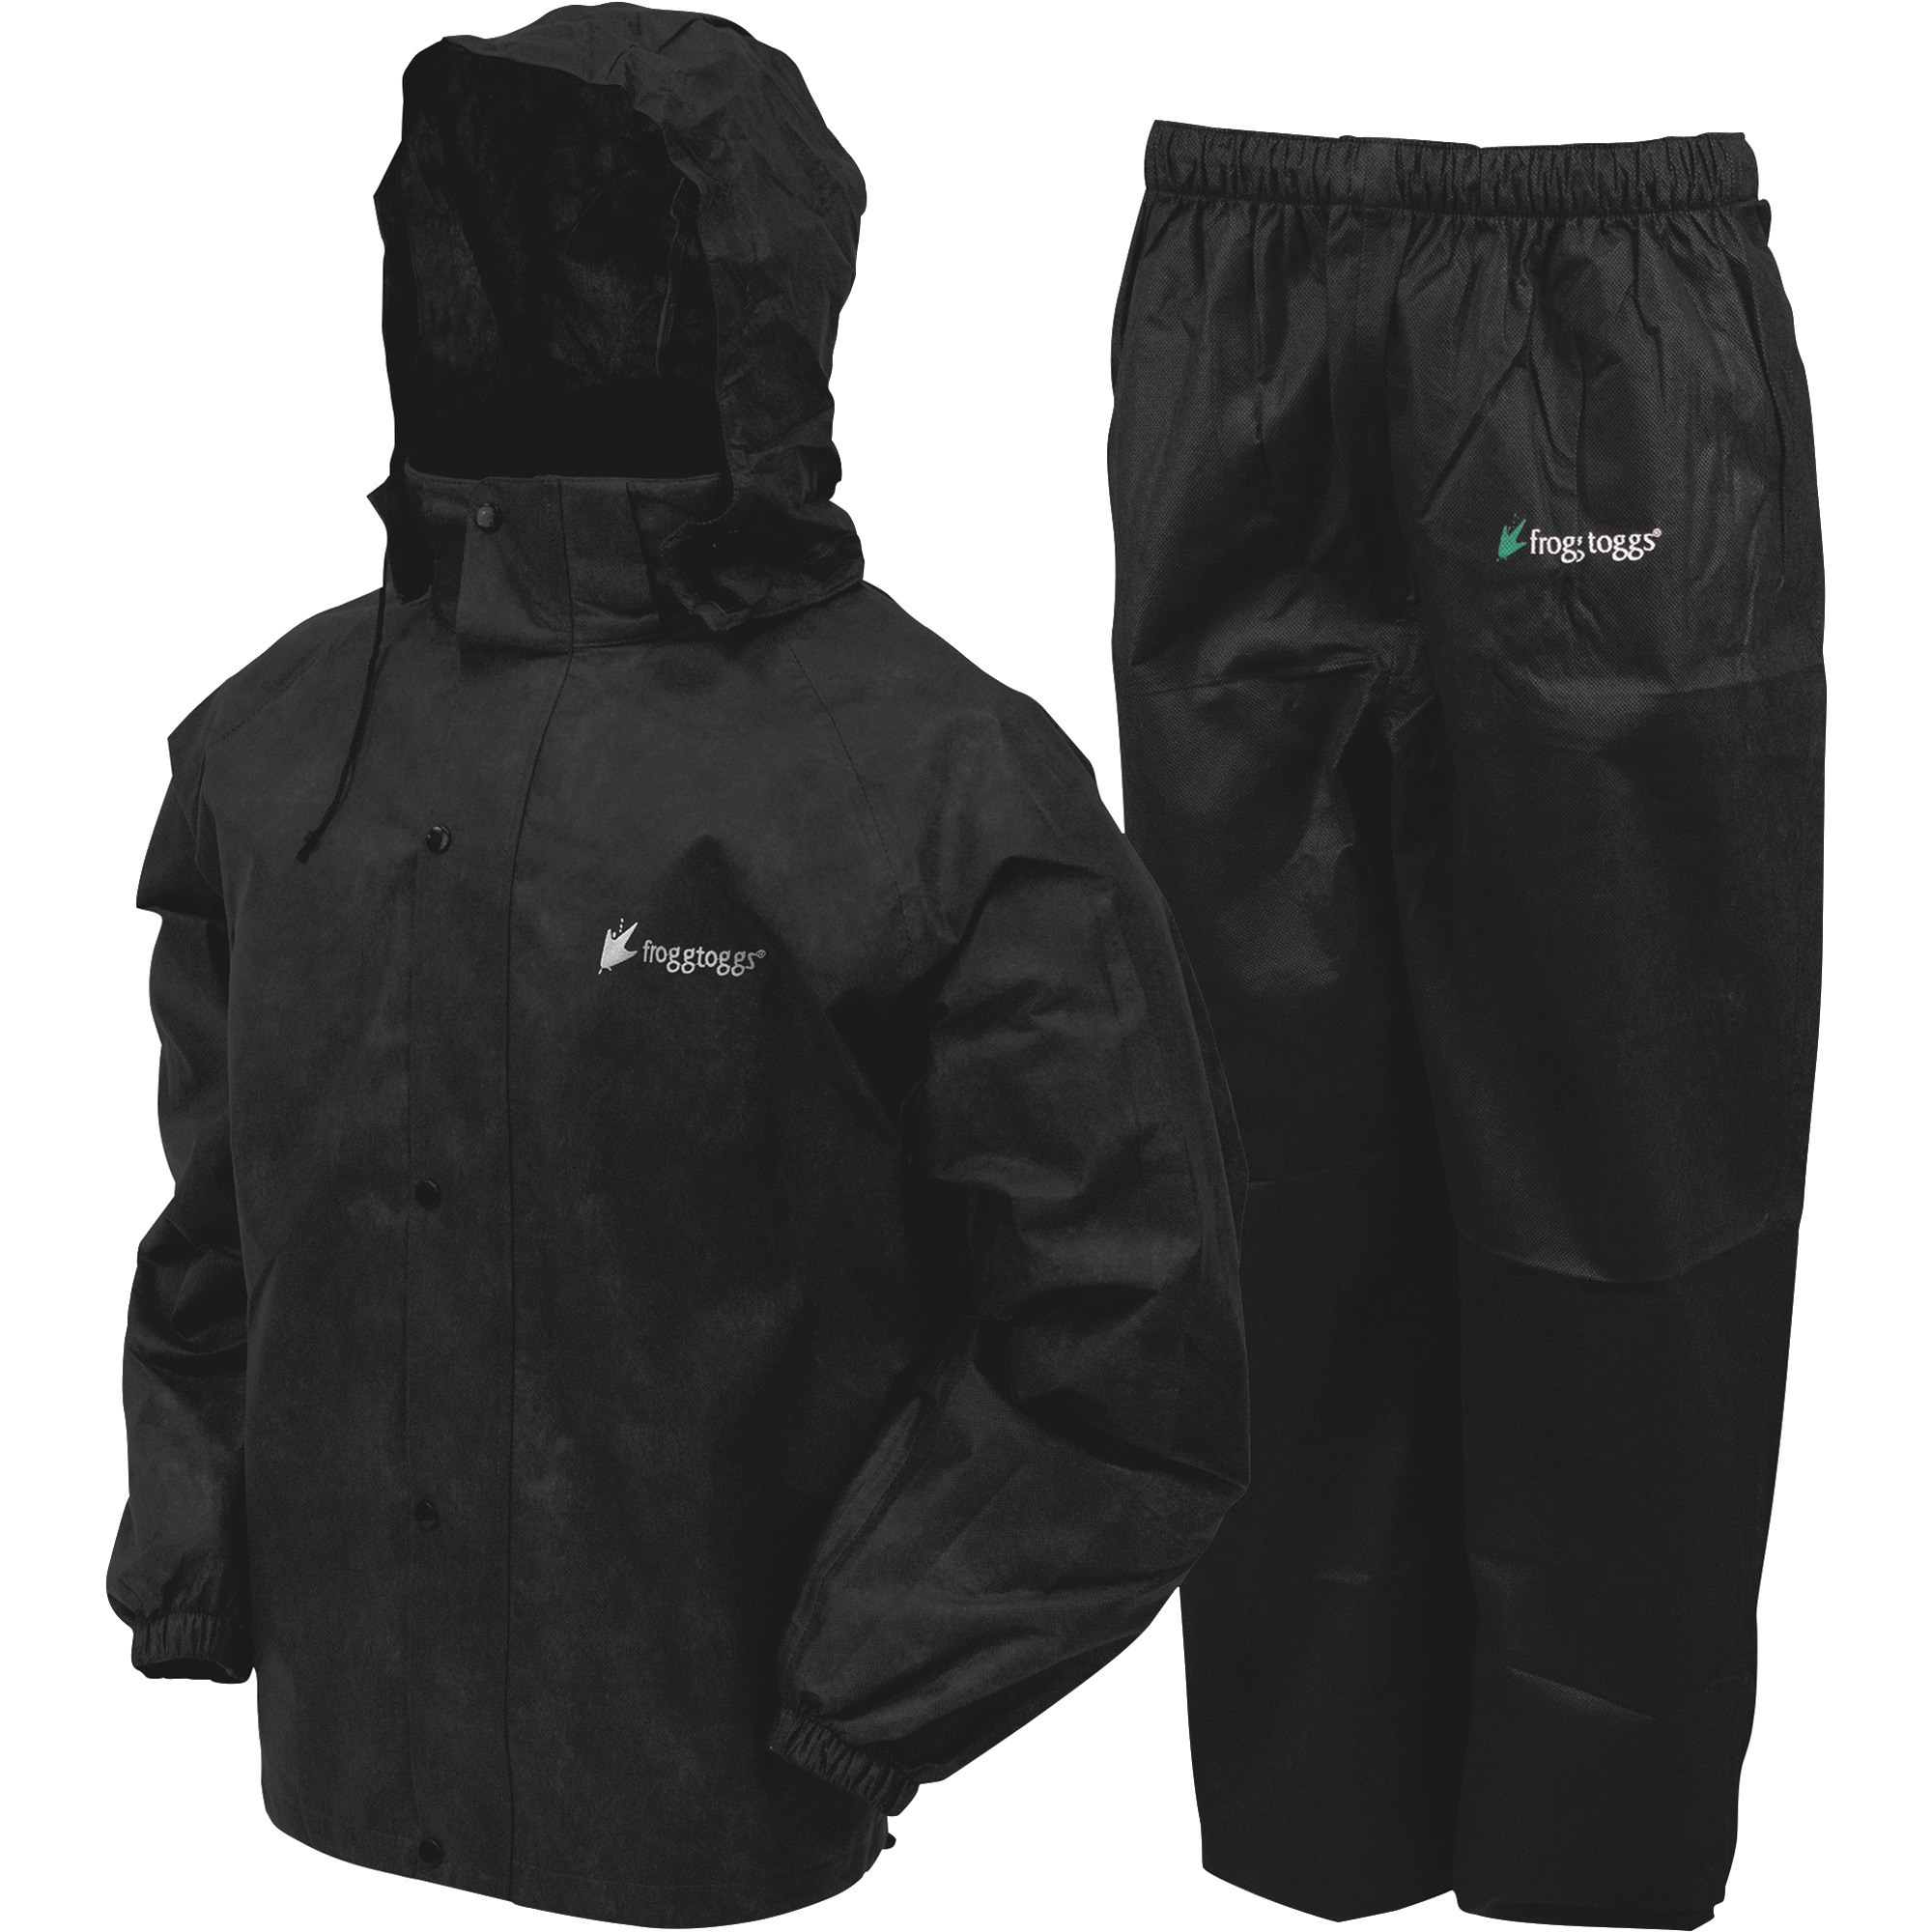 Frogg Toggs Men's Classic 50 All-Sport Rain and Wind Suit â Black, XL, Model AS1310-01XL